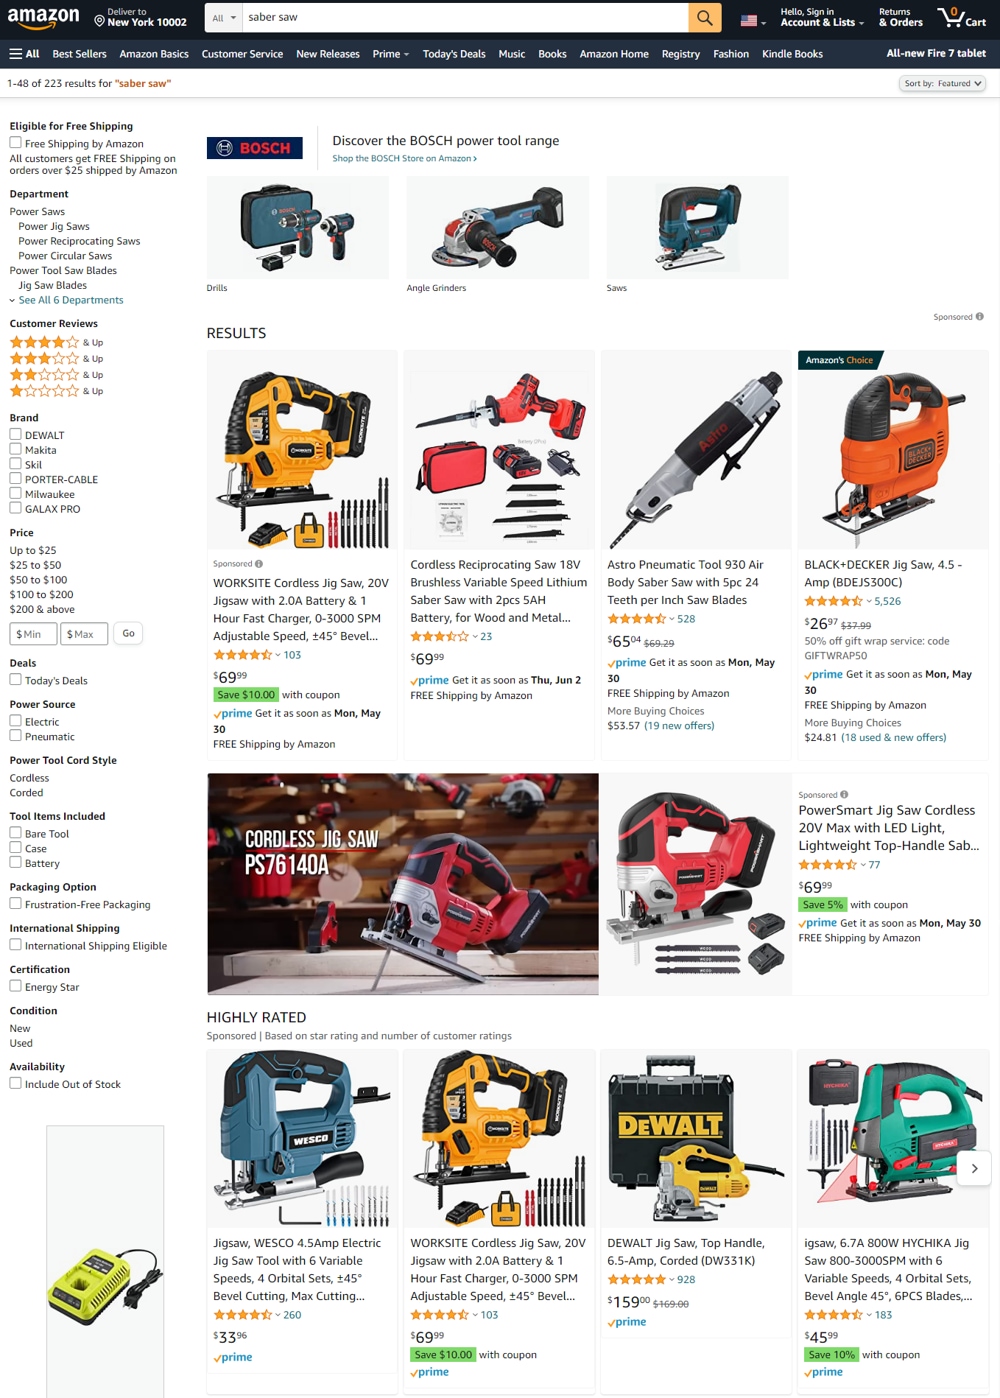 as a jigsaw or a reciprocating saw. A simple search on Amazon reveals this fact